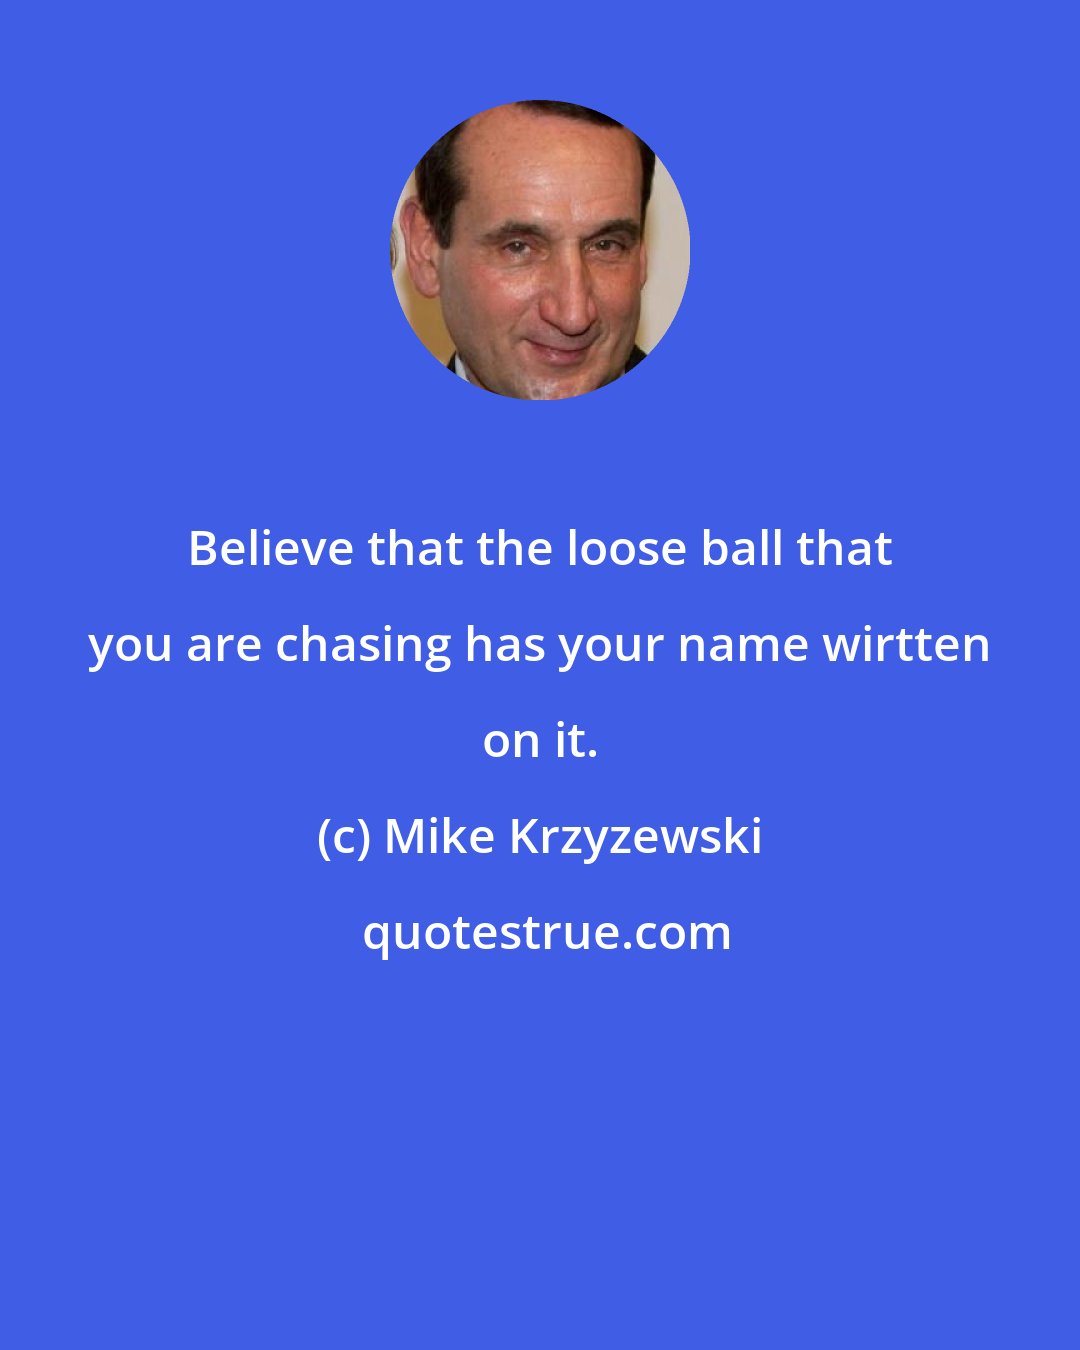 Mike Krzyzewski: Believe that the loose ball that you are chasing has your name wirtten on it.